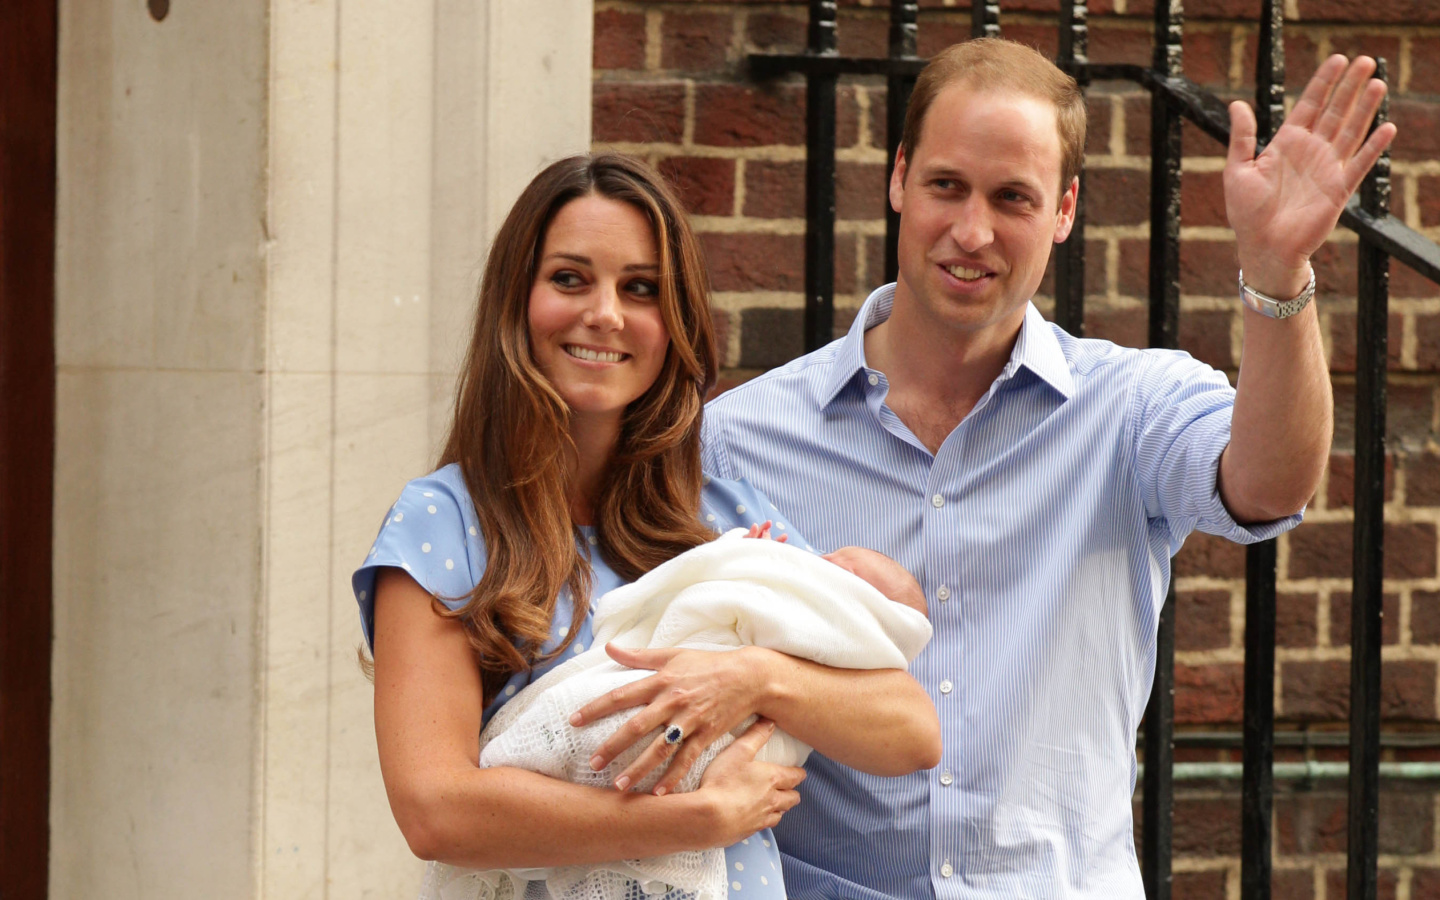 Royal Family Kate Middleton and William Prince wallpaper 1440x900